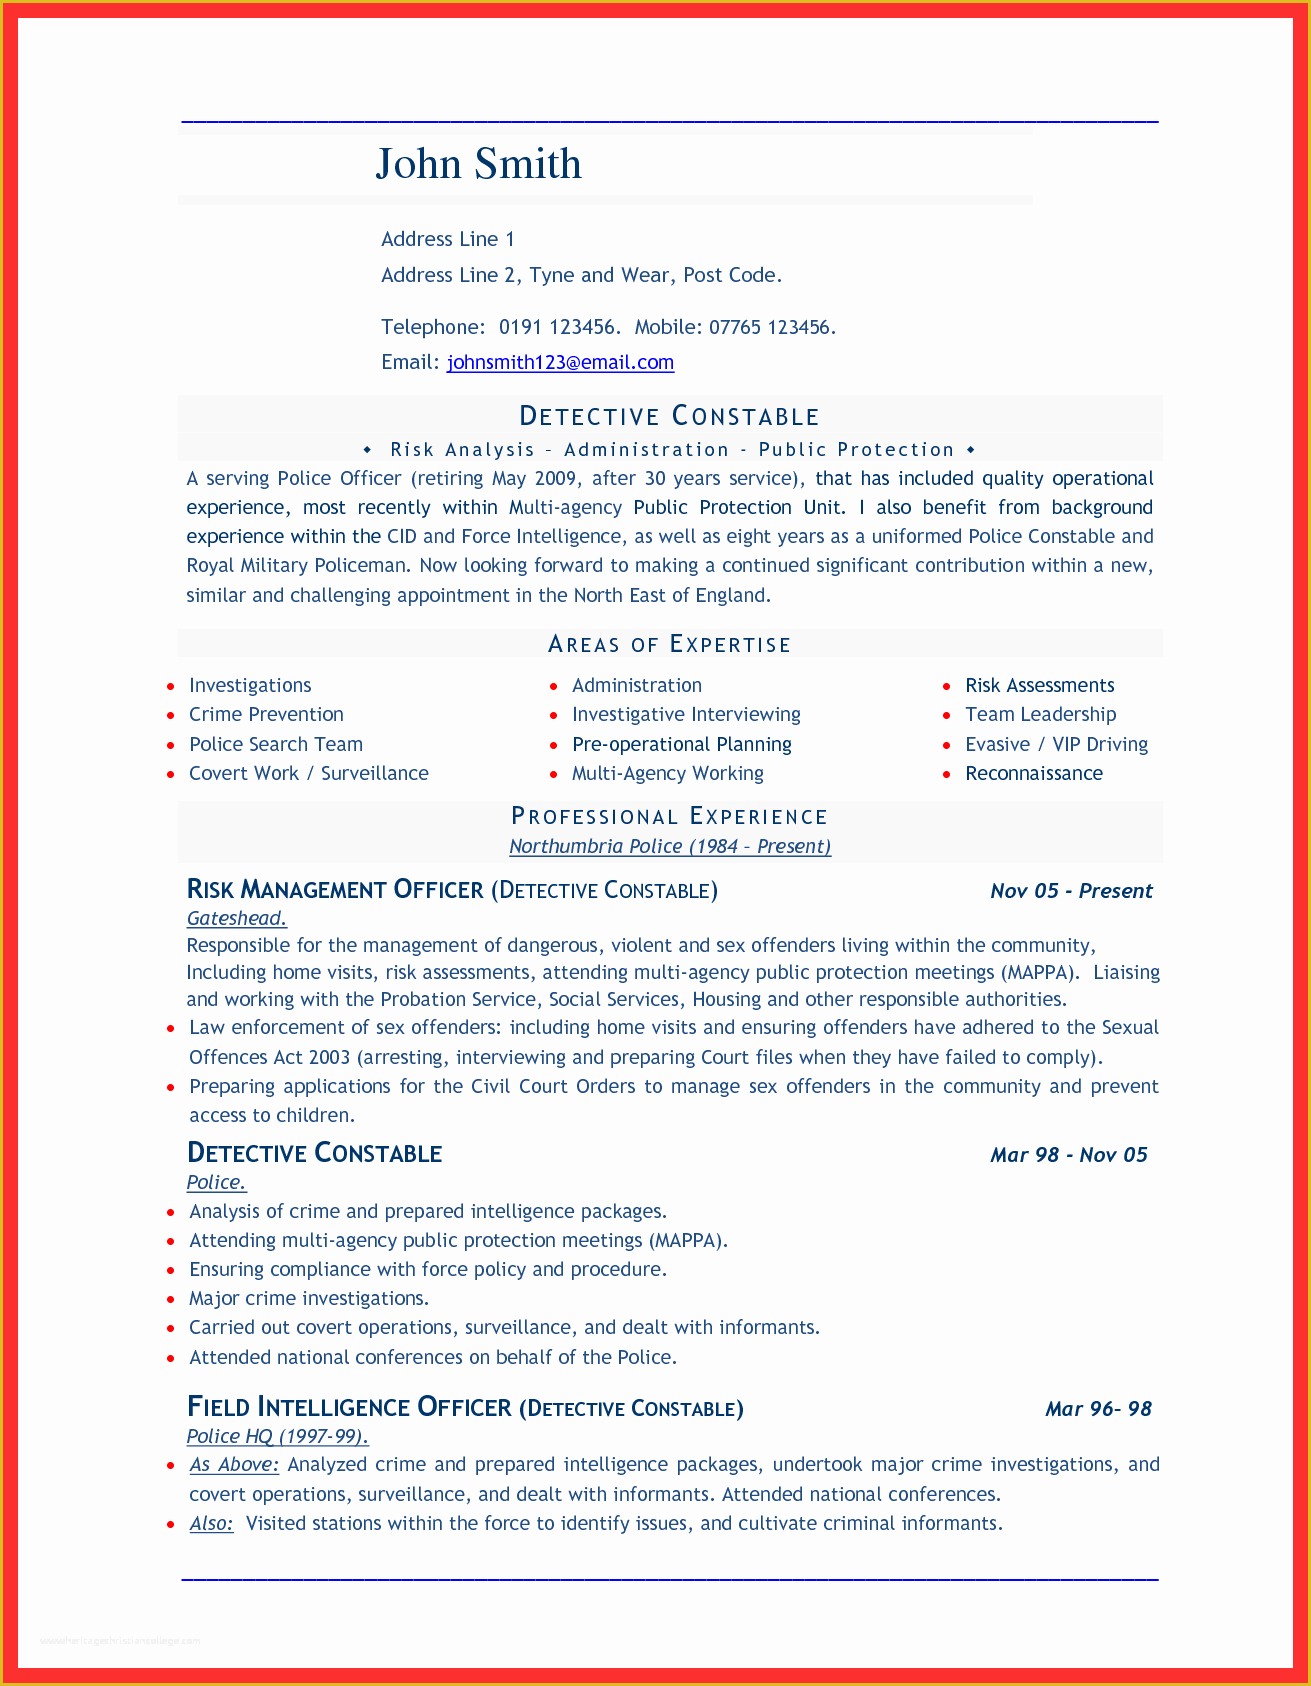 cv-templates-free-download-word-document-of-65-eye-catching-cv